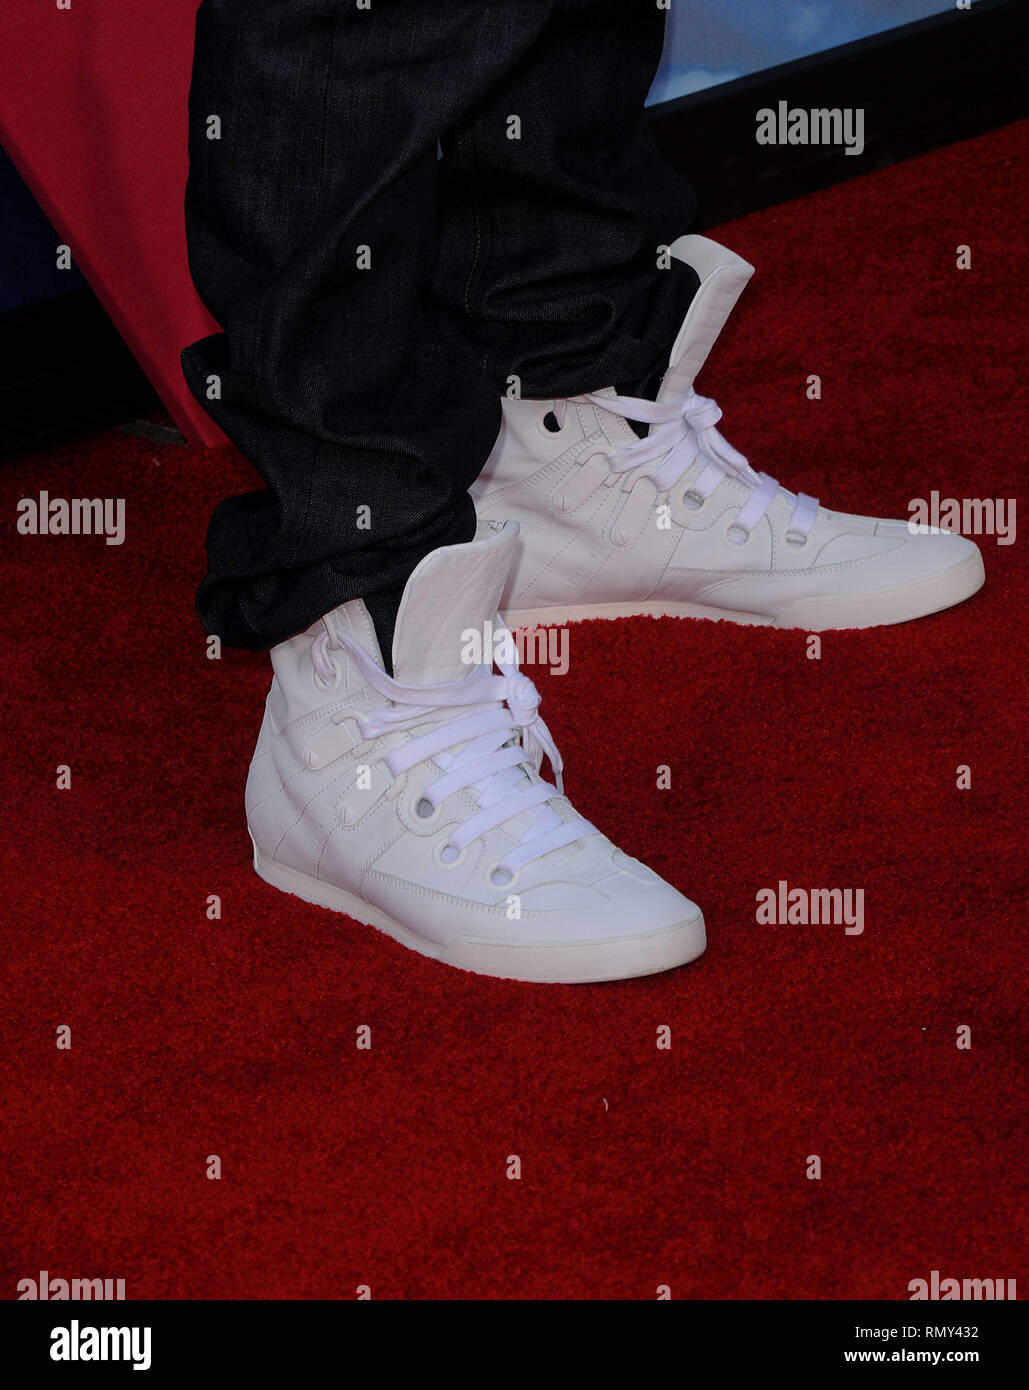 Chris Brown- MTV - vma Awards 2008 on the Paramount Lot  In Los Angeles.  shoesBrownChris 133.jpgBrownChris 133  Event in Hollywood Life - California, Red Carpet Event, Vertical, USA, Film Industry, Celebrities, Photography, Bestof, Arts Culture and Entertainment, Topix Celebrities fashion, Best of, Hollywood Life, Event in Hollywood Life - California, Red Carpet and backstage, movie celebrities, TV celebrities, Music celebrities, Topix, from the year 2000-2009 inquiry tsuni@Gamma-USA.com , Credit Tsuni / USA,  Object wear on the red carpet, one person,   Event in Hollywood Life - California,  Stock Photo